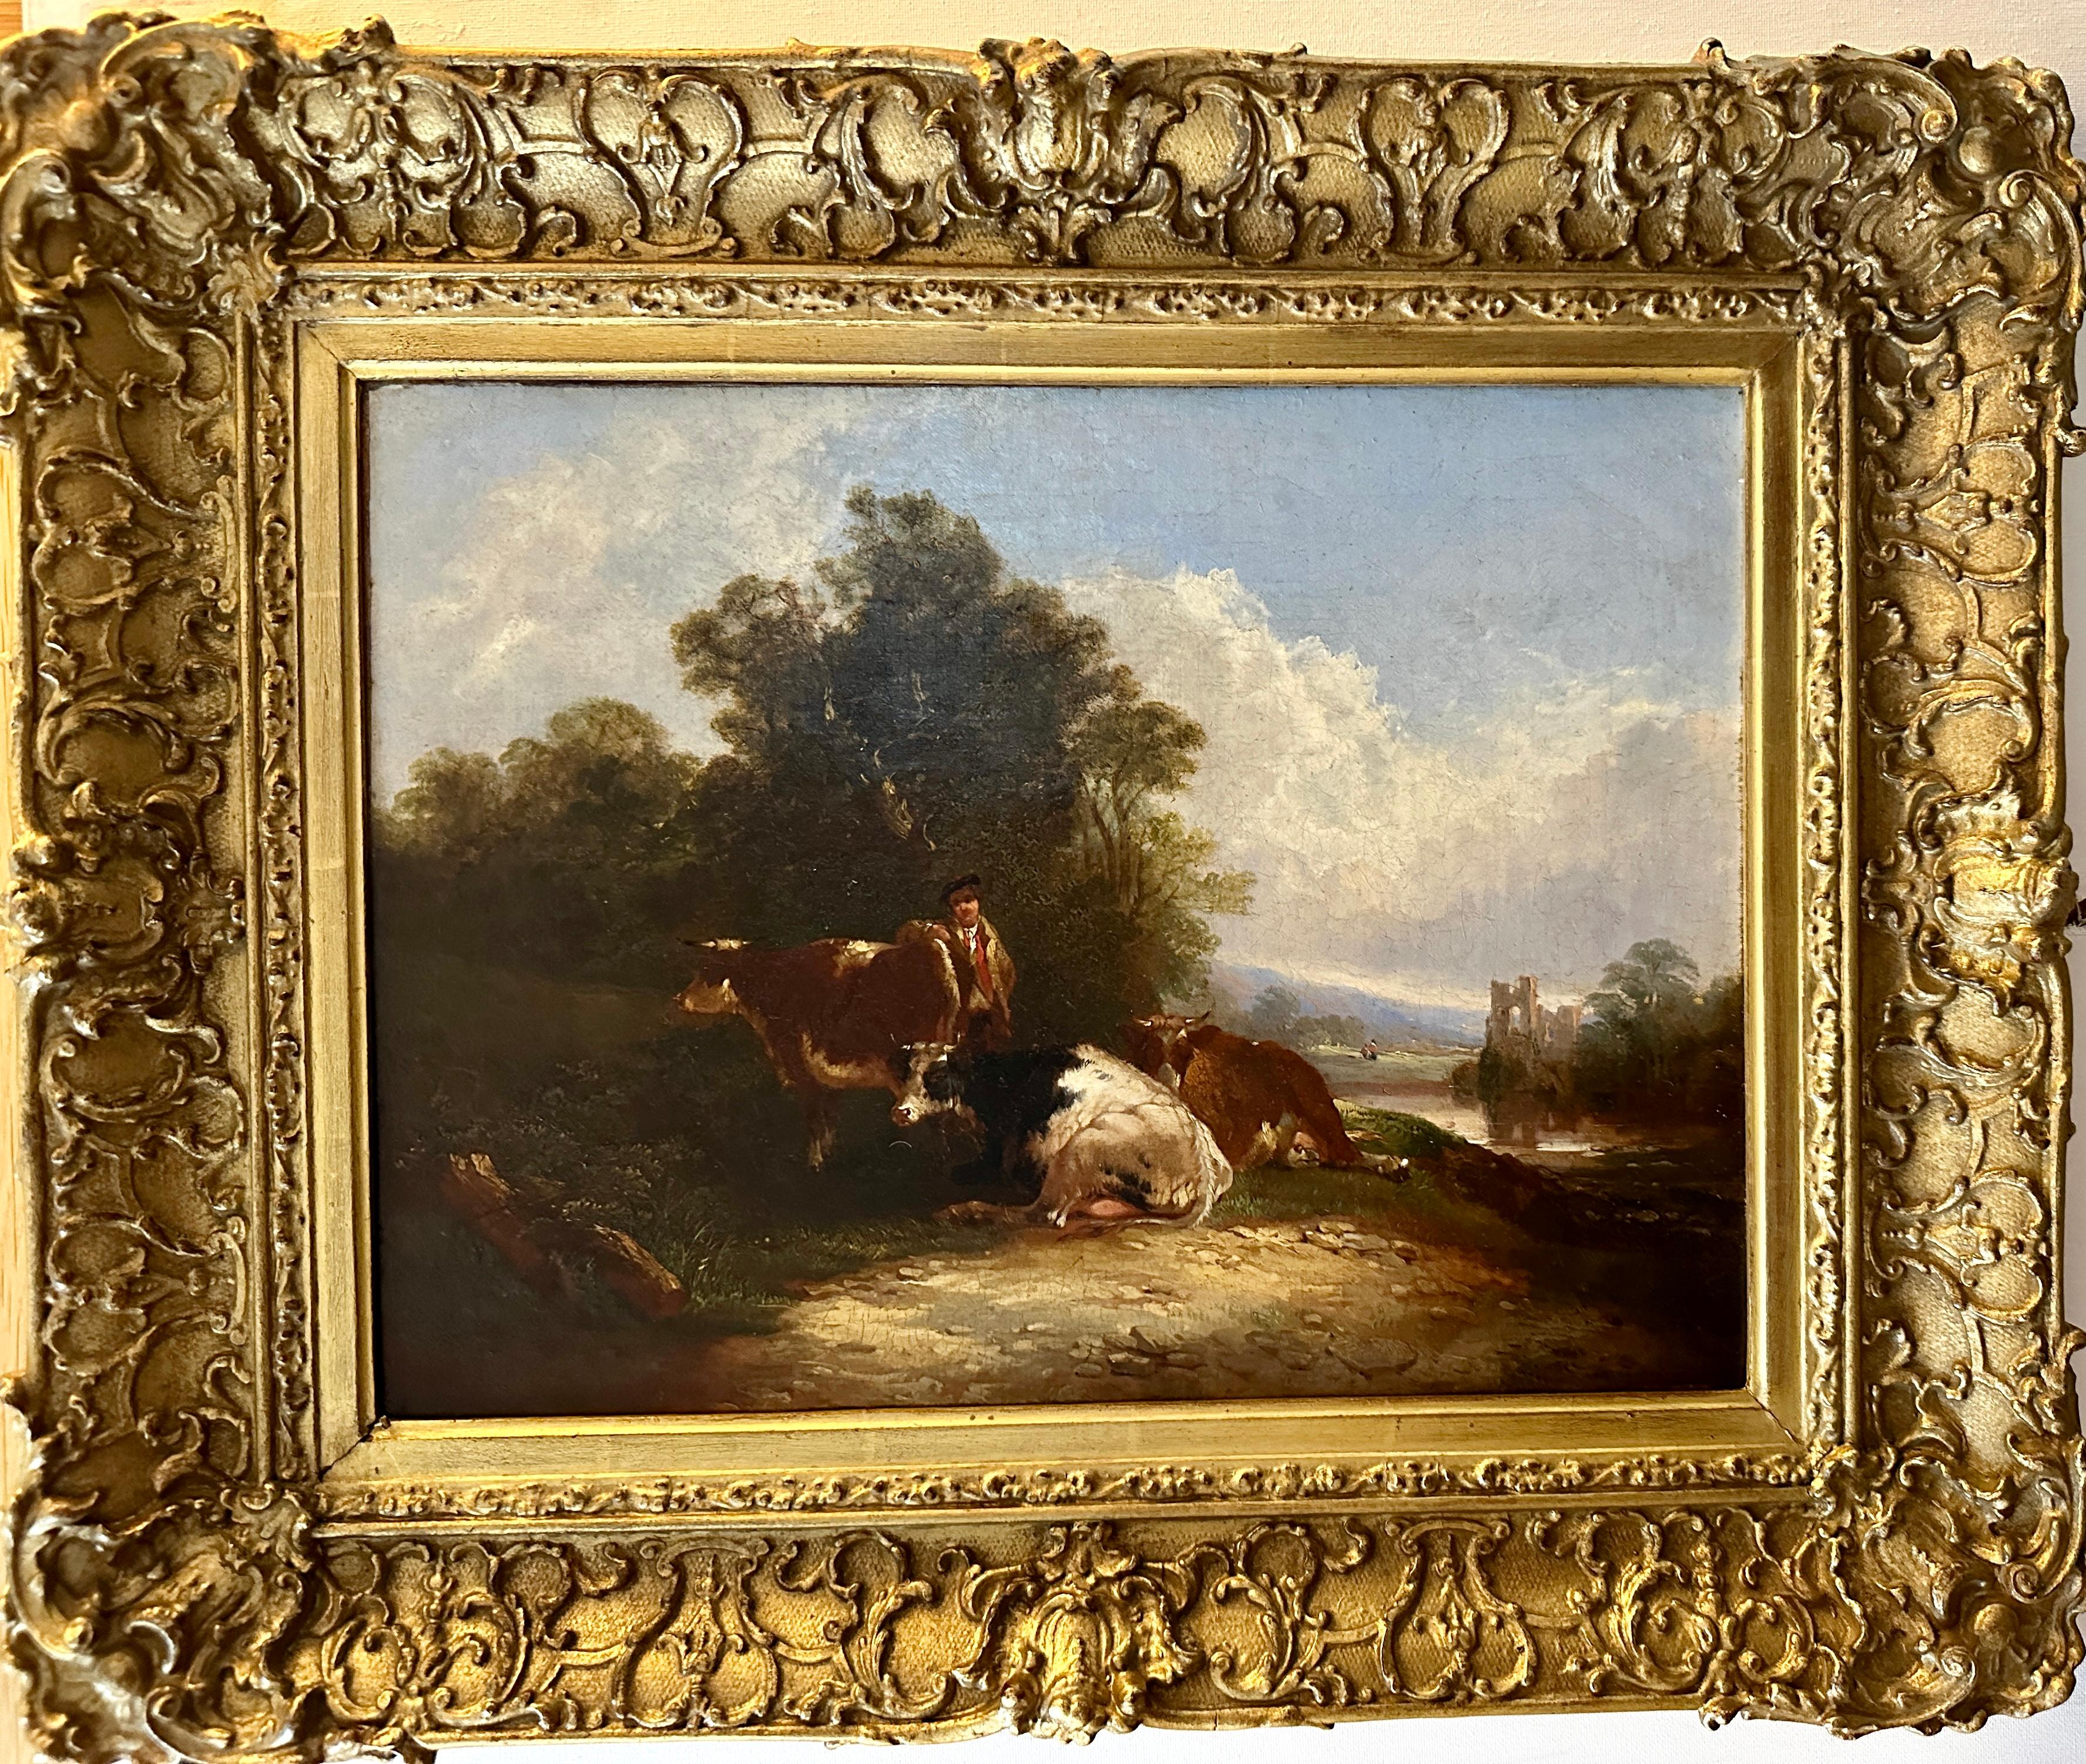 English 19th century Antique landscape with horses and farmer by a Cottage - Painting by William Shayer Senior